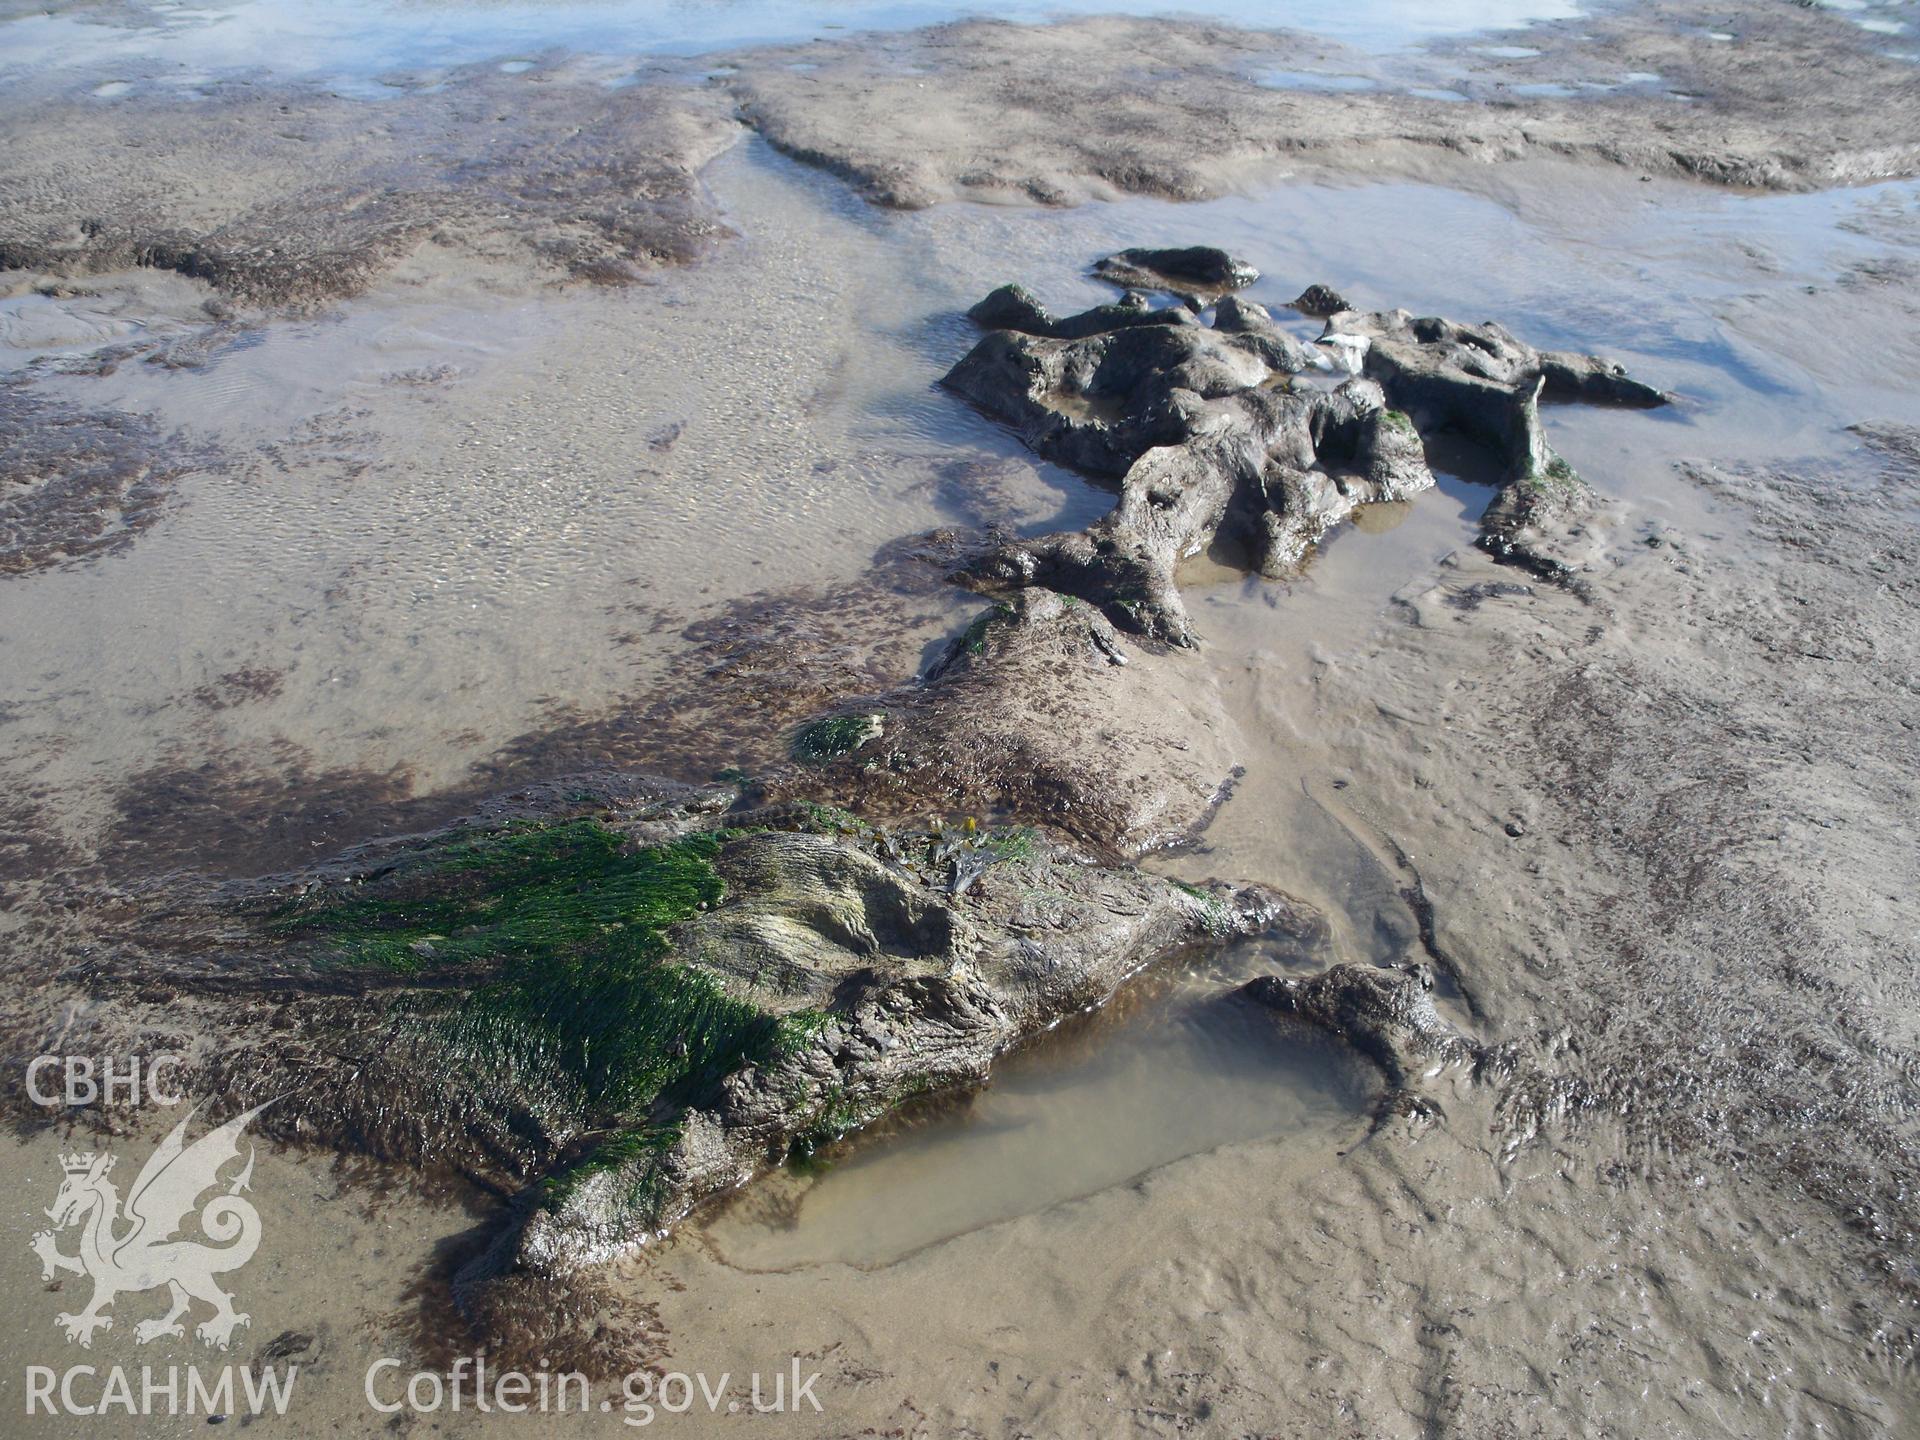 Borth submerged forest (between RNLI lifeboat station and upper Borth). Showing preserved tree remains